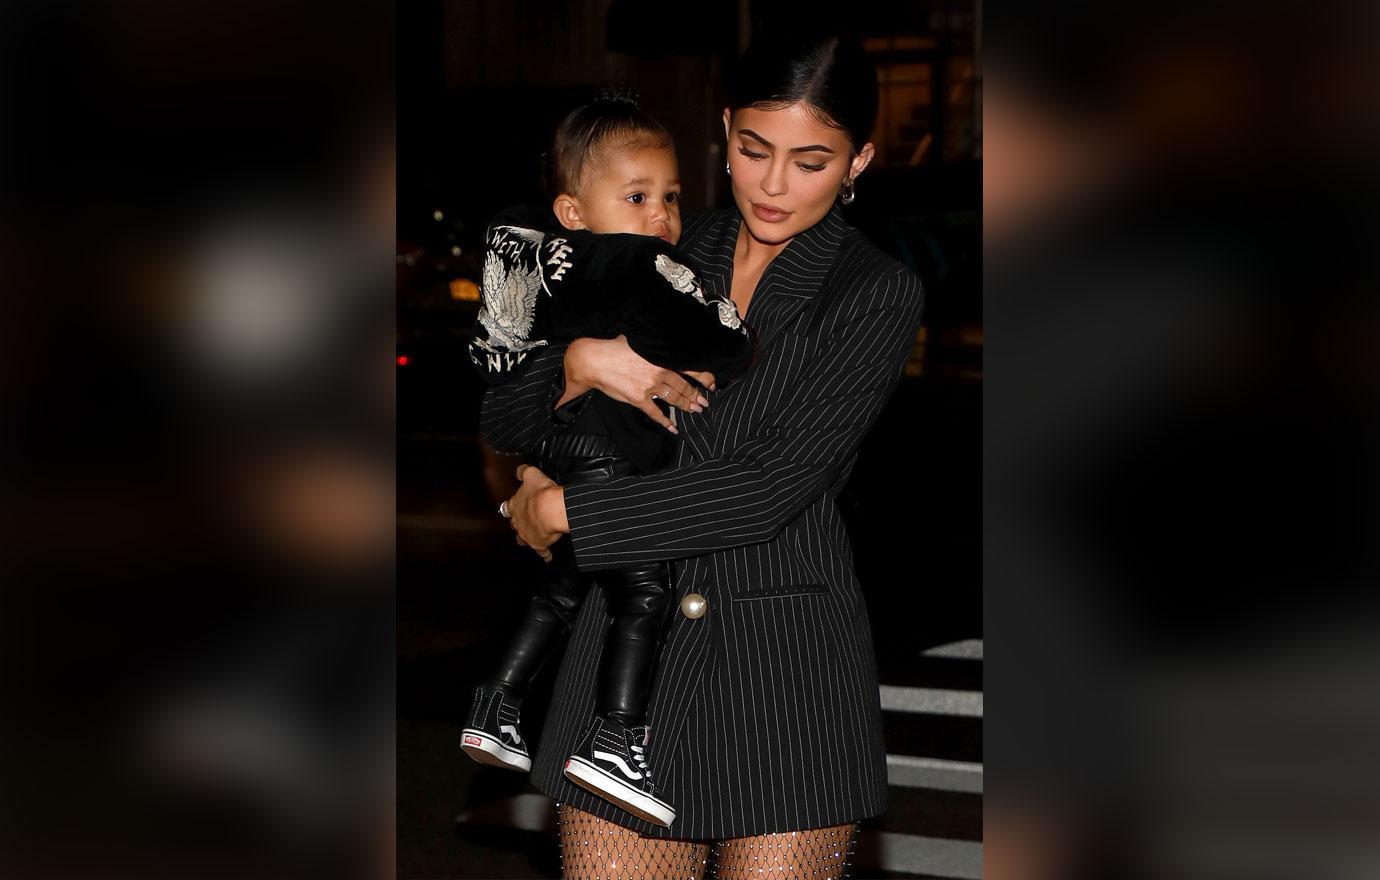 Kylie Jenner Carries Daughter Stormi To New York Dinner